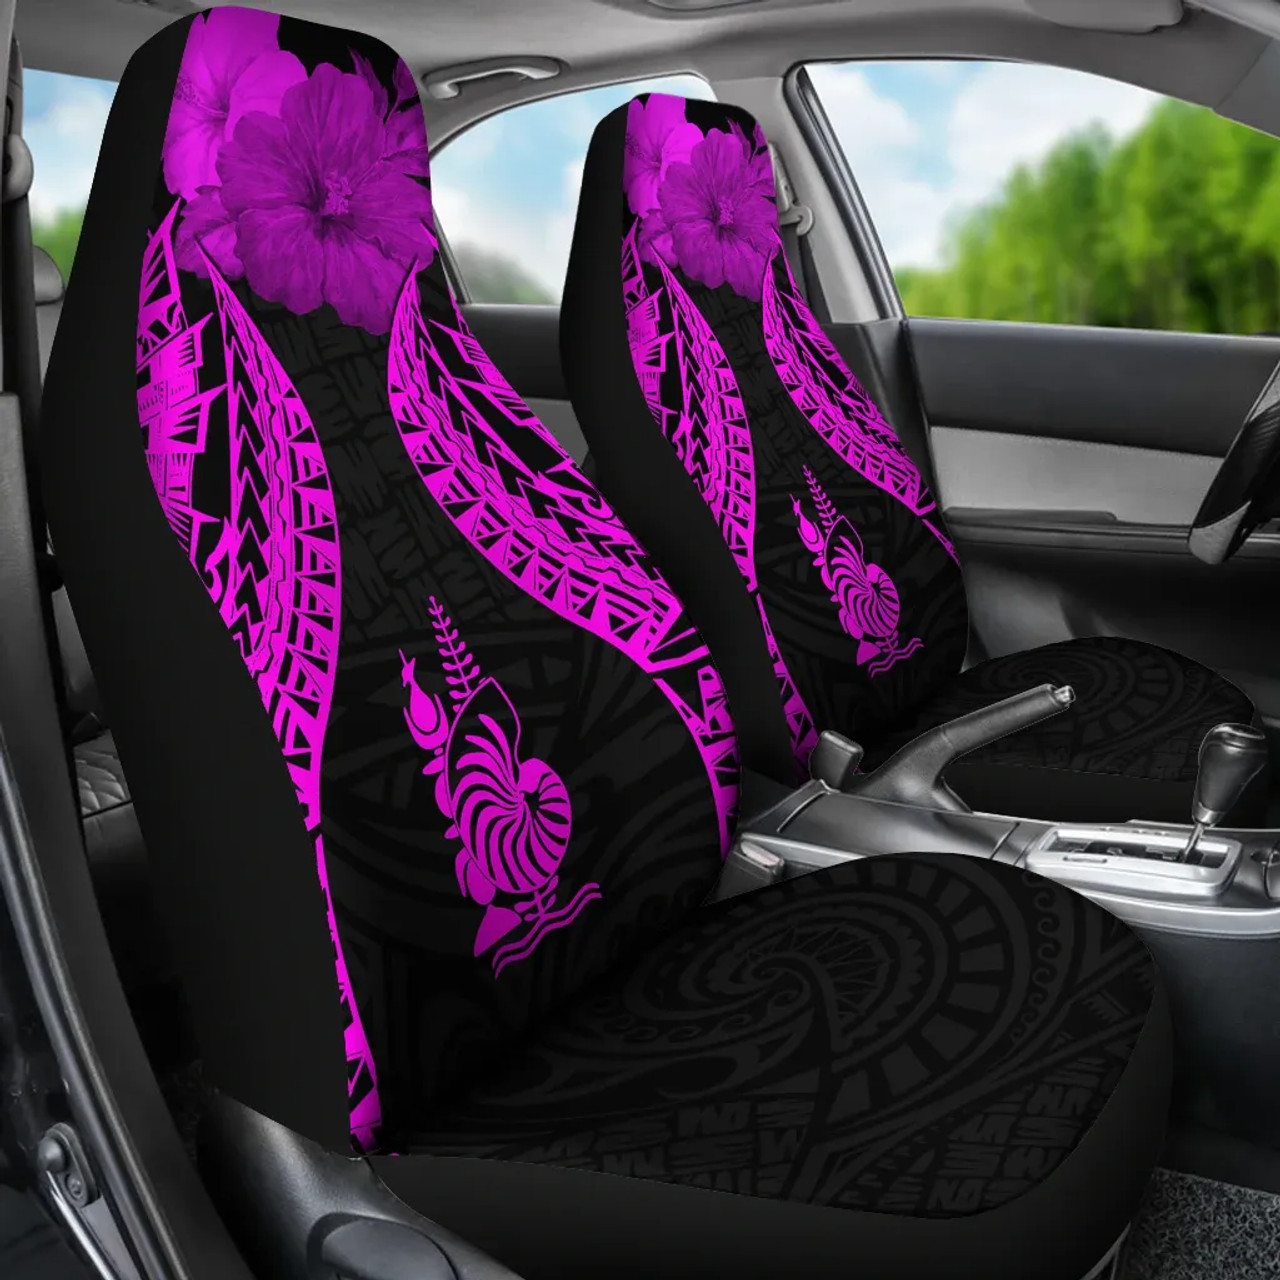 New Caledonia Polynesian Car Seat Covers Pride Seal And Hibiscus Pink